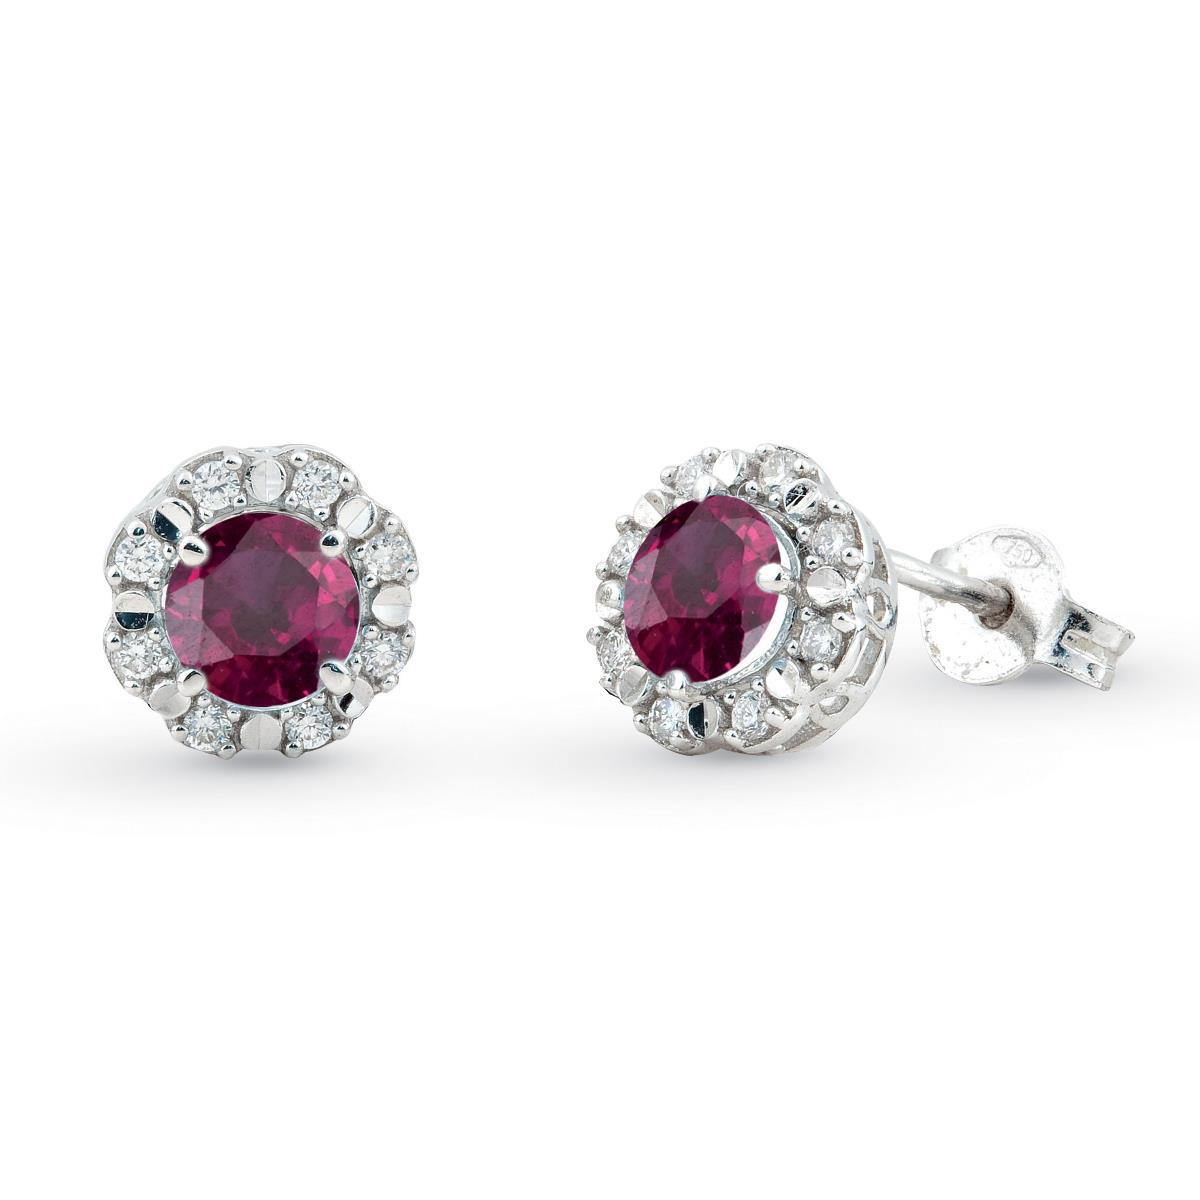 18kt white gold earrings with diamonds and central precious stones - OD210